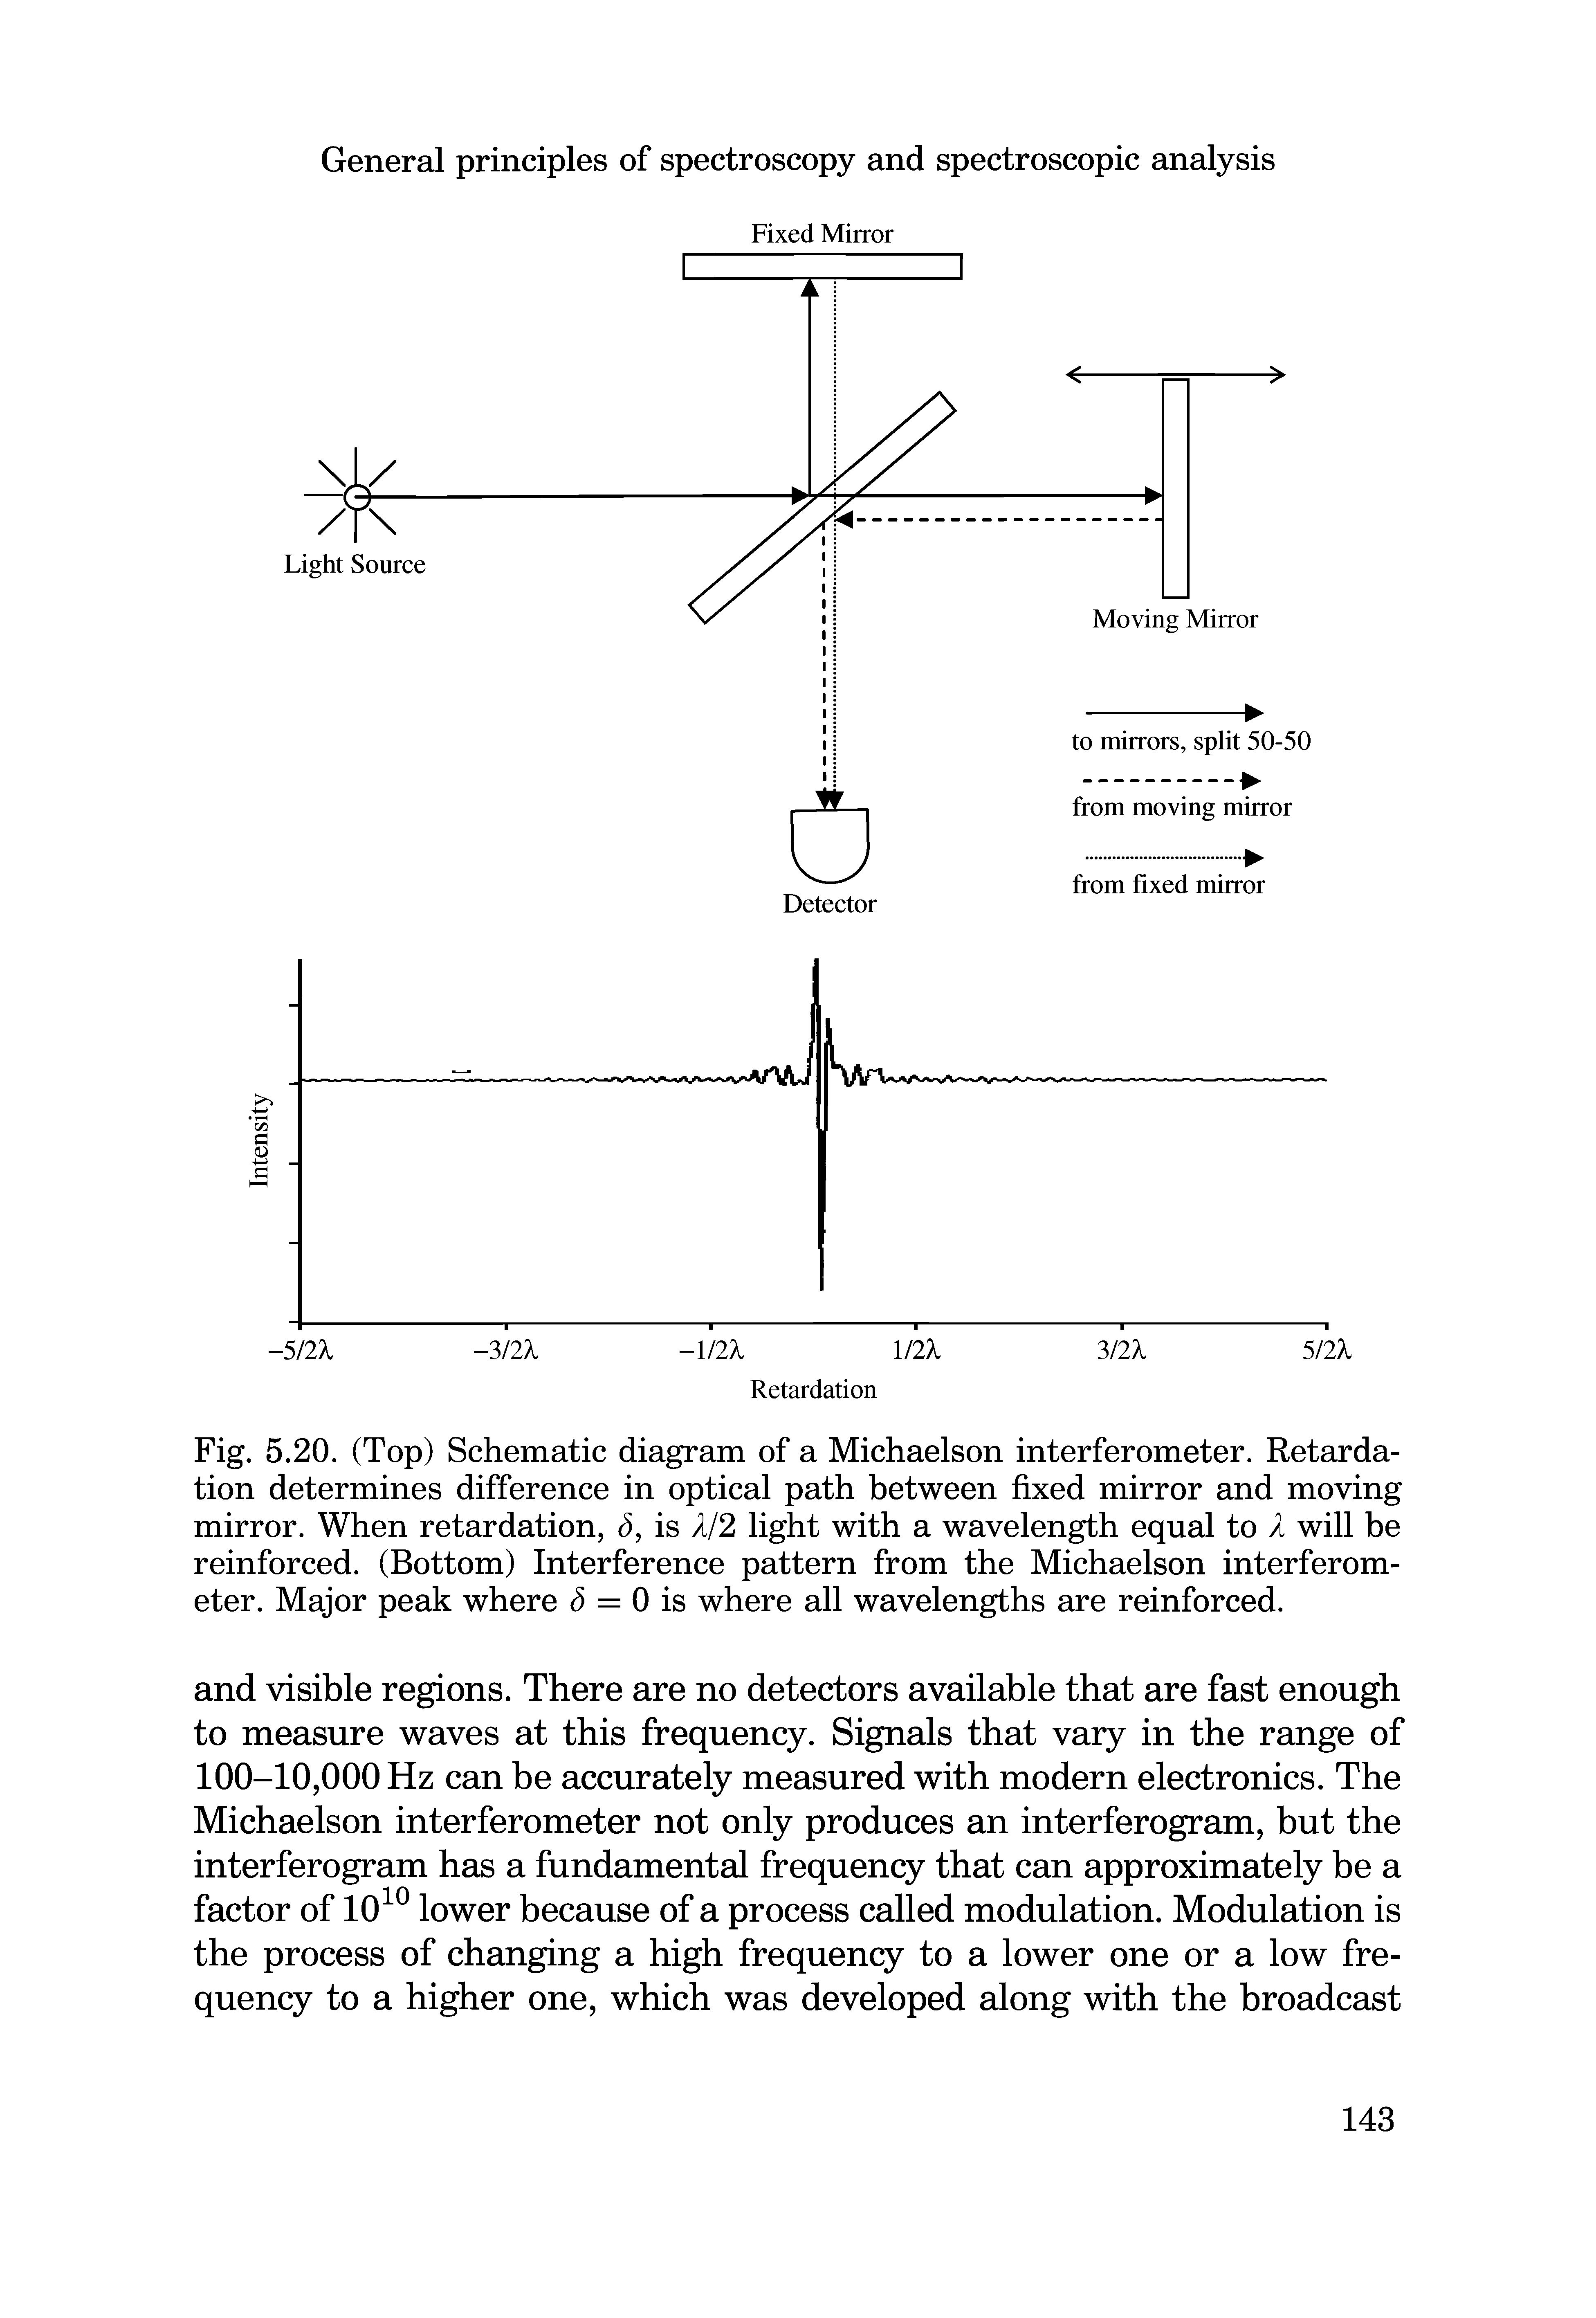 Fig. 5.20. (Top) Schematic diagram of a Michaelson interferometer. Retardation determines difference in optical path between fixed mirror and moving mirror. When retardation, S, is 1/2 light with a wavelength equal to A will be reinforced. (Bottom) Interference pattern from the Michaelson interferometer. Major peak where S = 0 is where all wavelengths are reinforced.